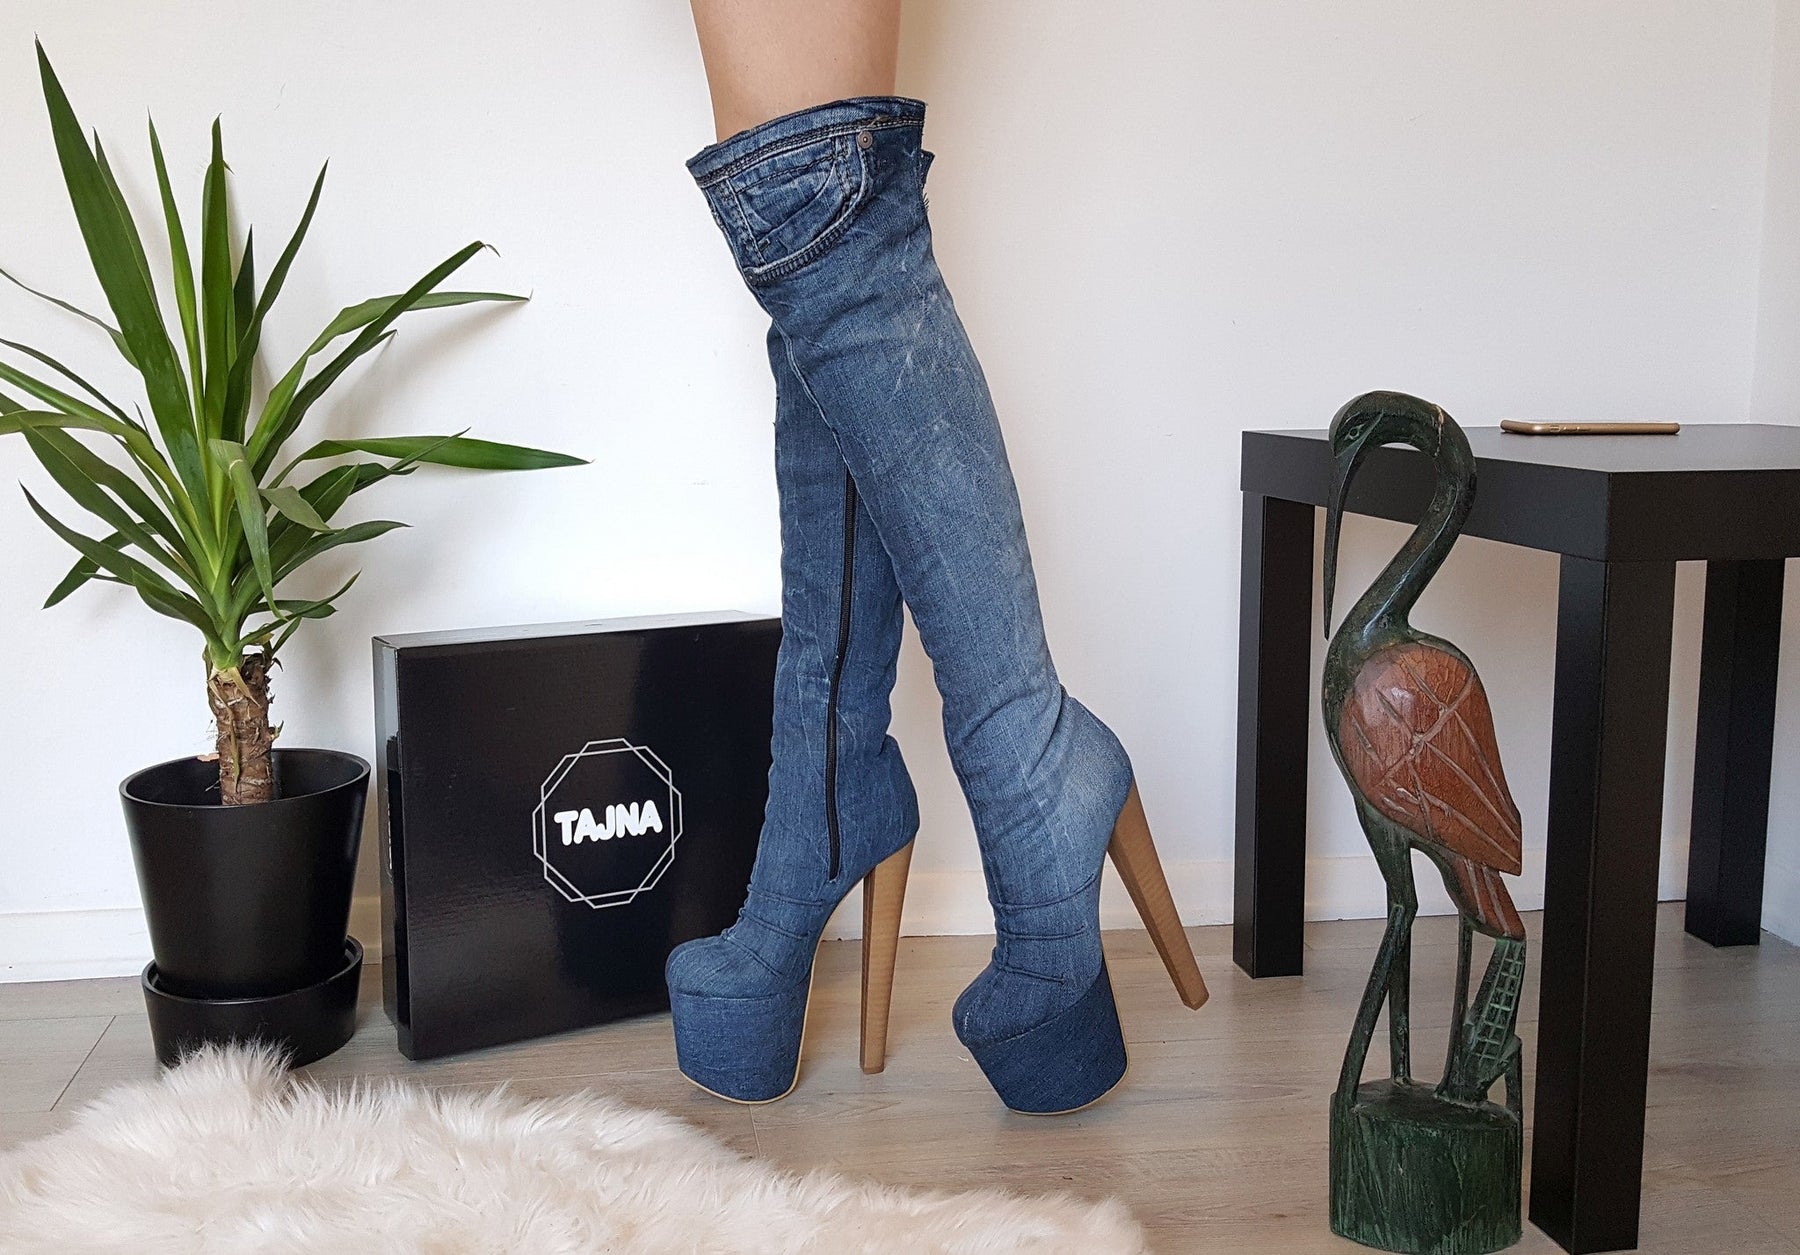 White Over The Knee High Platform Boots | Tajna Club EU39 /UK6 /USw8 / Other (Please State Below) / 19-20 cm